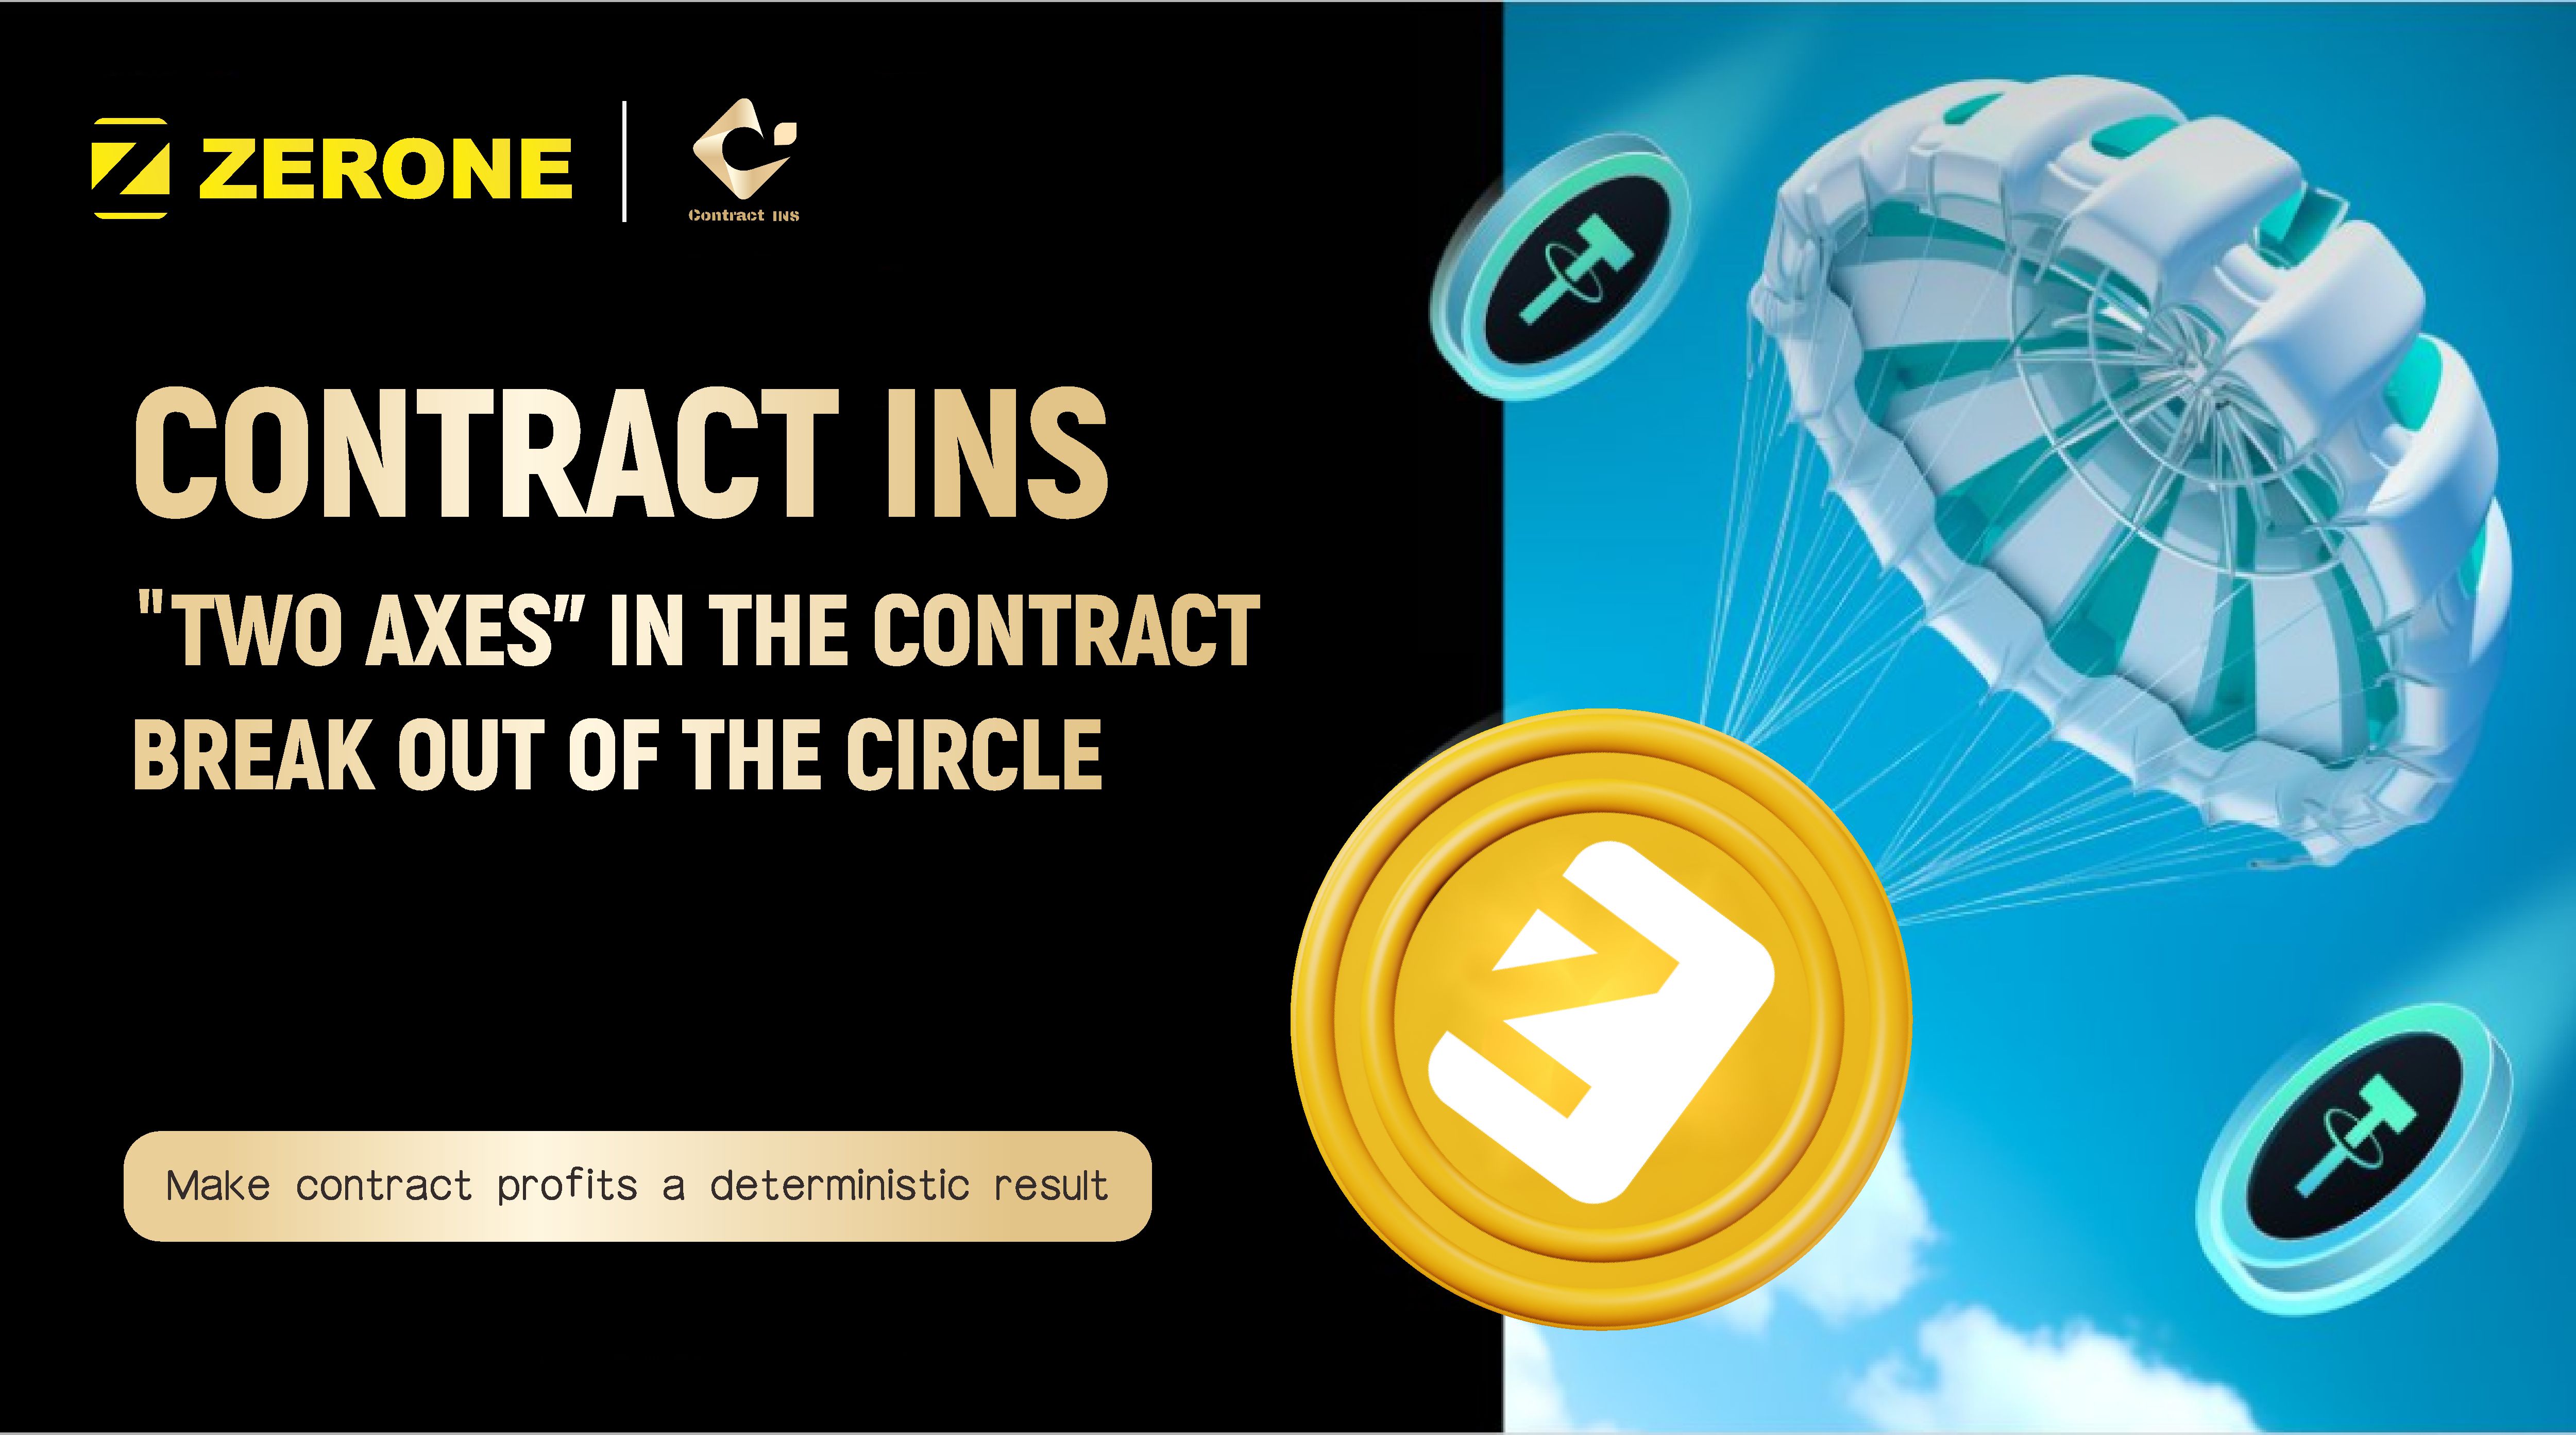 CONTRACT INS Genius Trader Recruitment Order! Have an exciting skill battle with the masters!